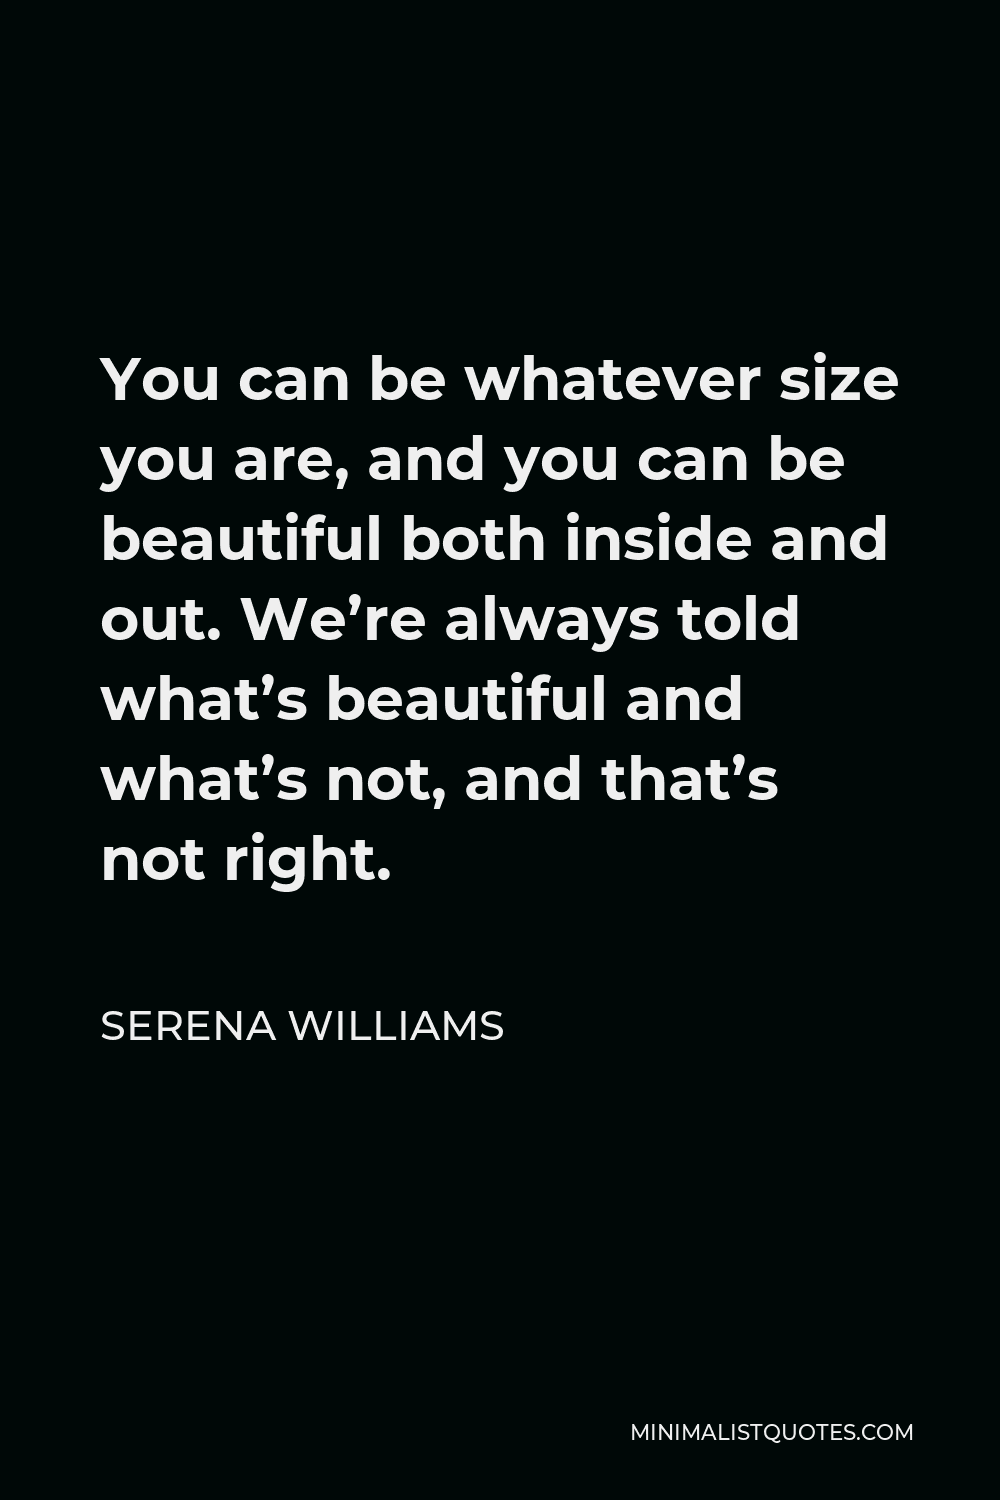 Serena Williams Quote - You can be whatever size you are, and you can be beautiful both inside and out. We’re always told what’s beautiful and what’s not, and that’s not right.